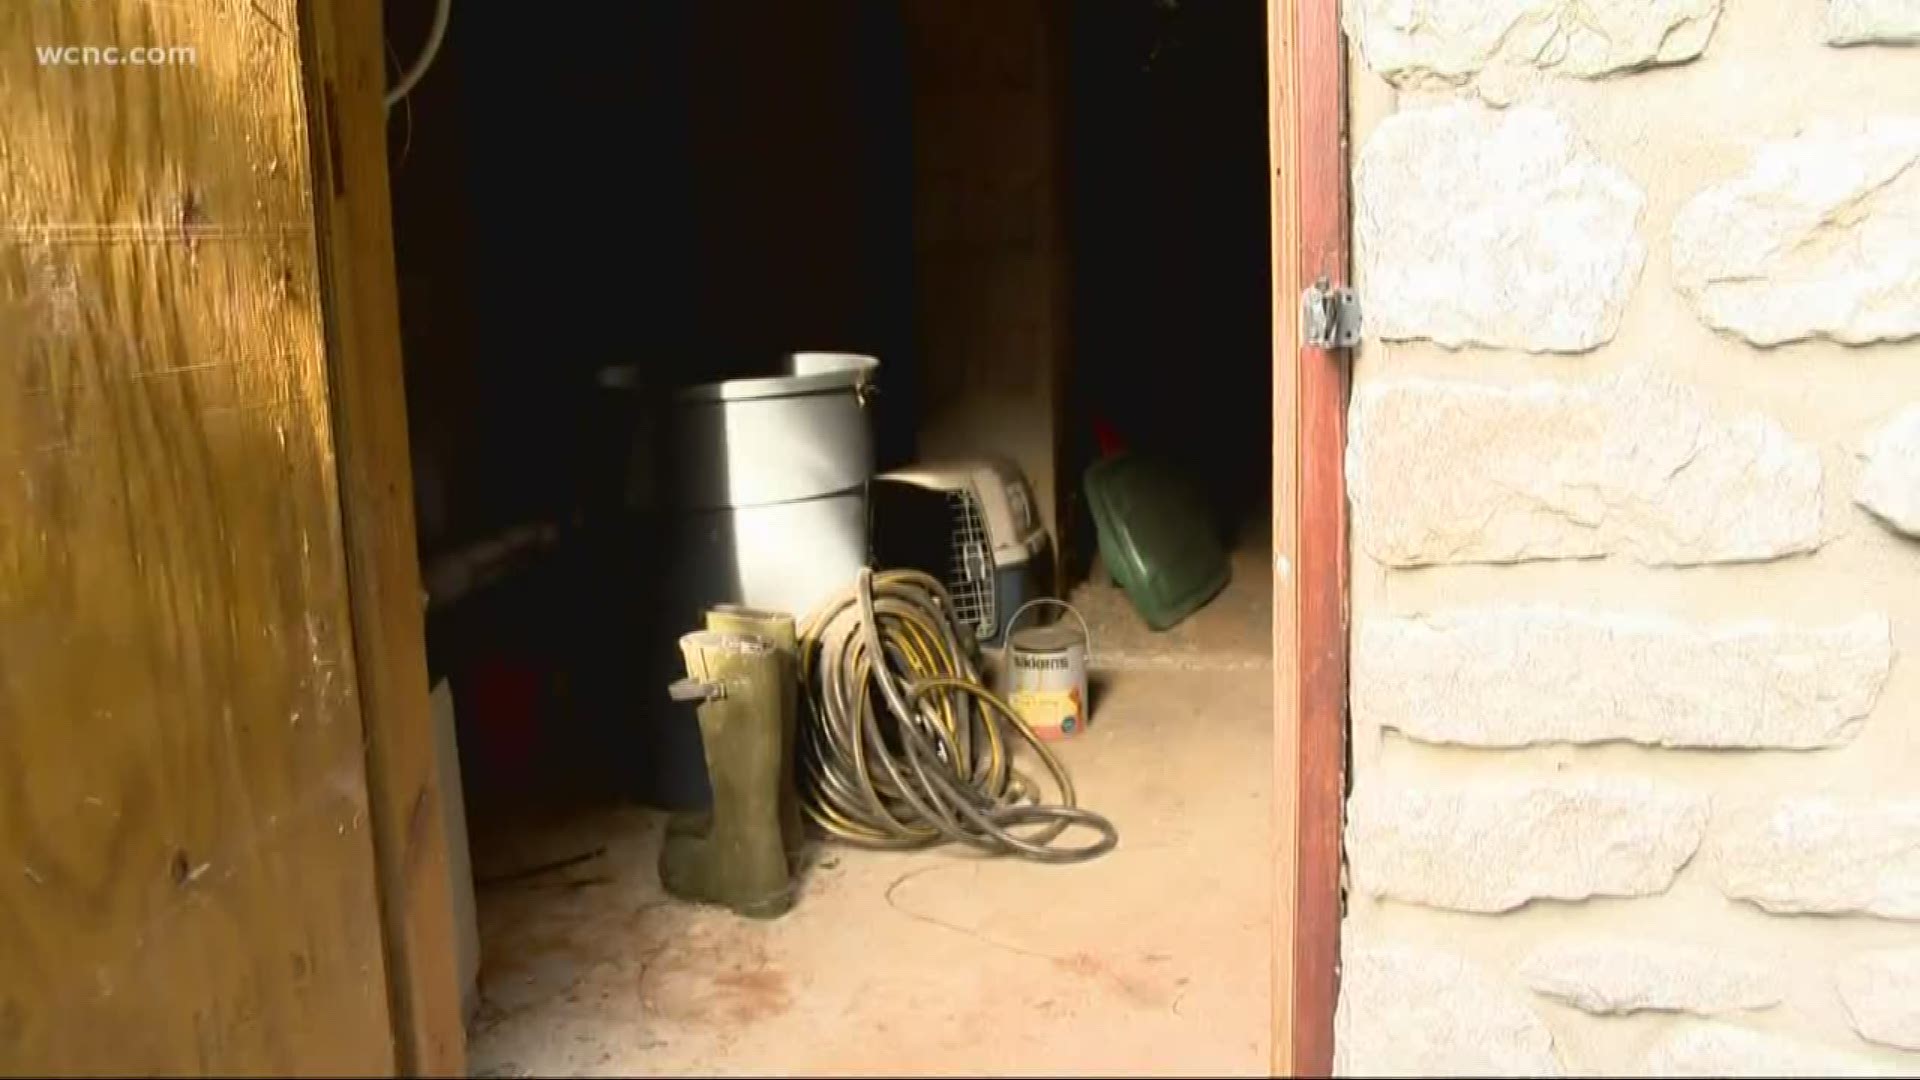 The homeowner said her landscapers discovered several items in the crawl space including candles, Coke bottles, and toilet paper.